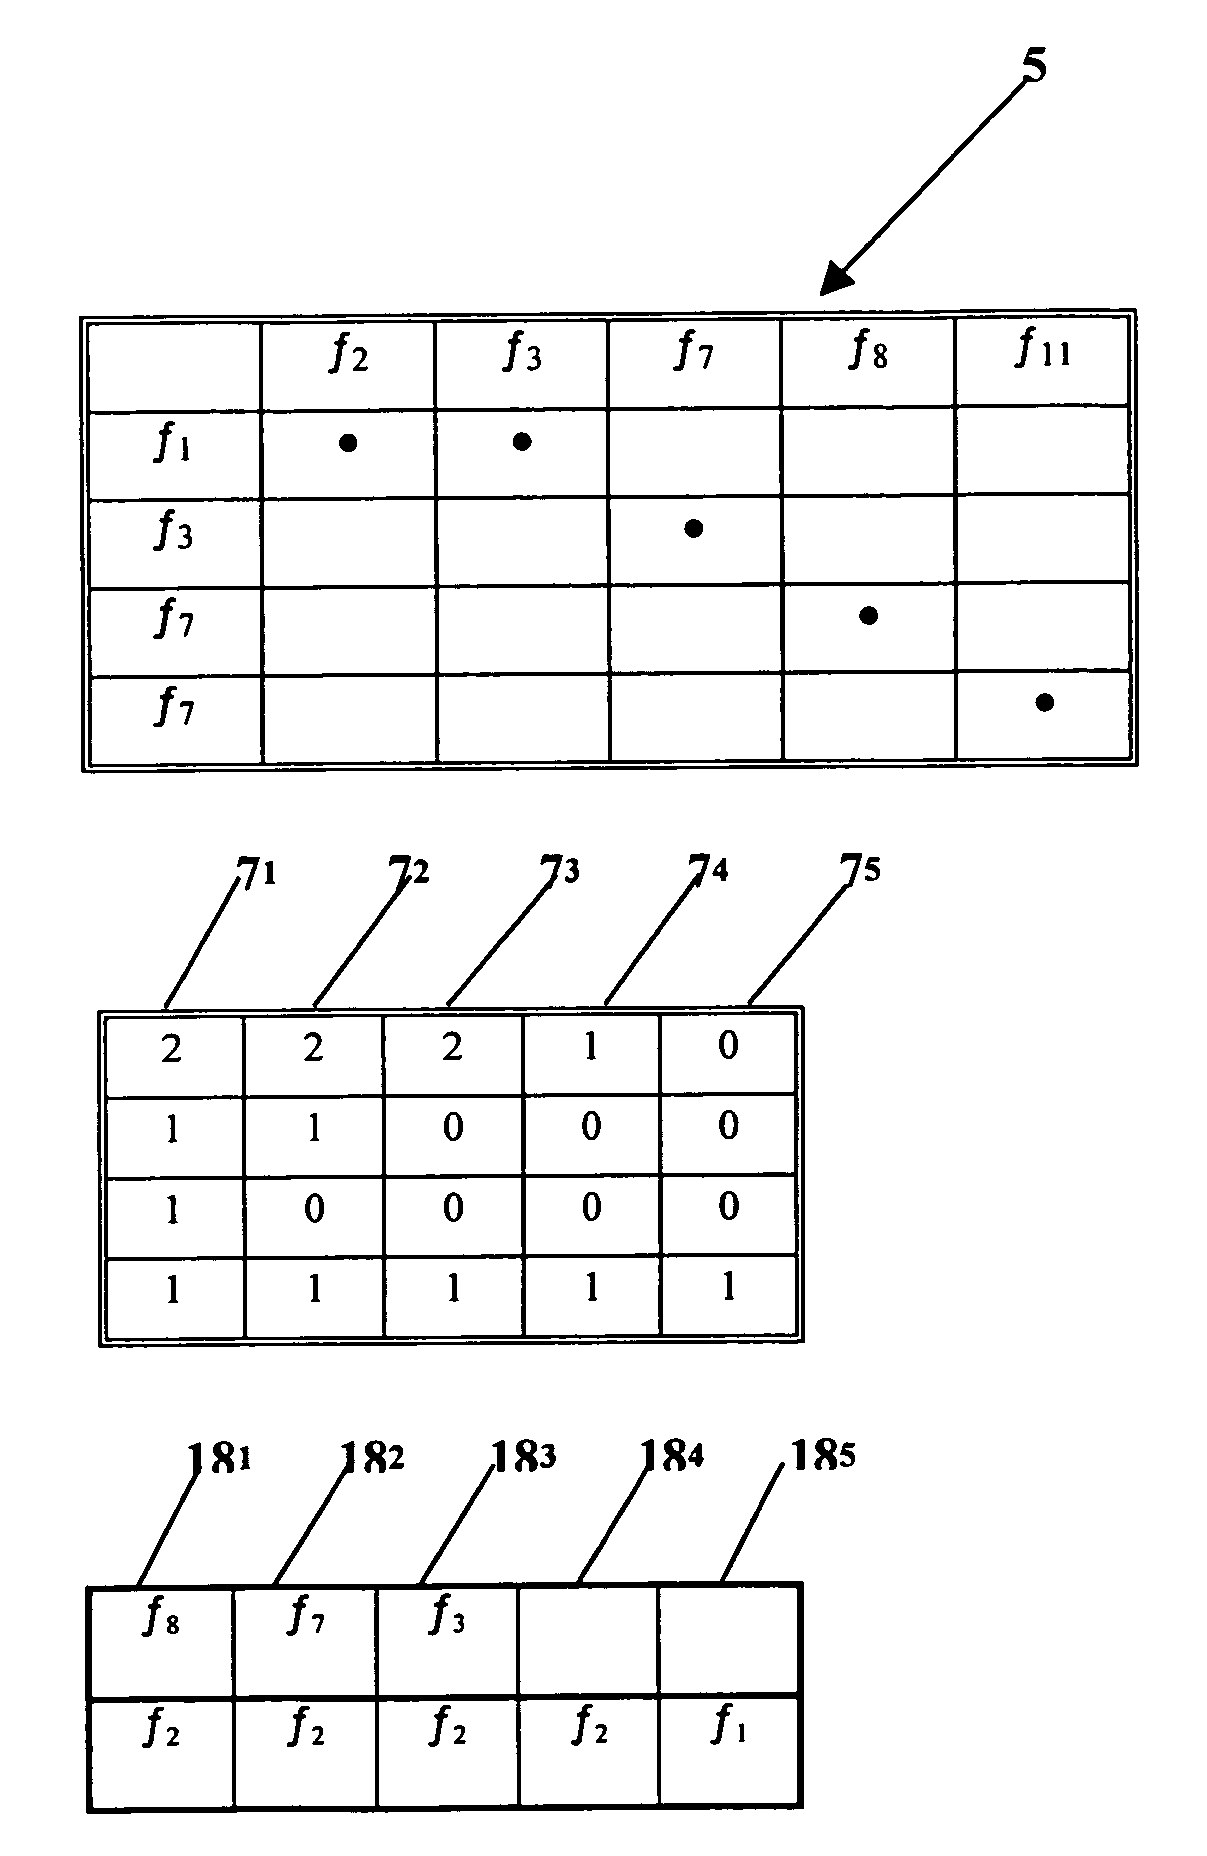 Method and device for model resolution and its use for detecting attacks against computer systems